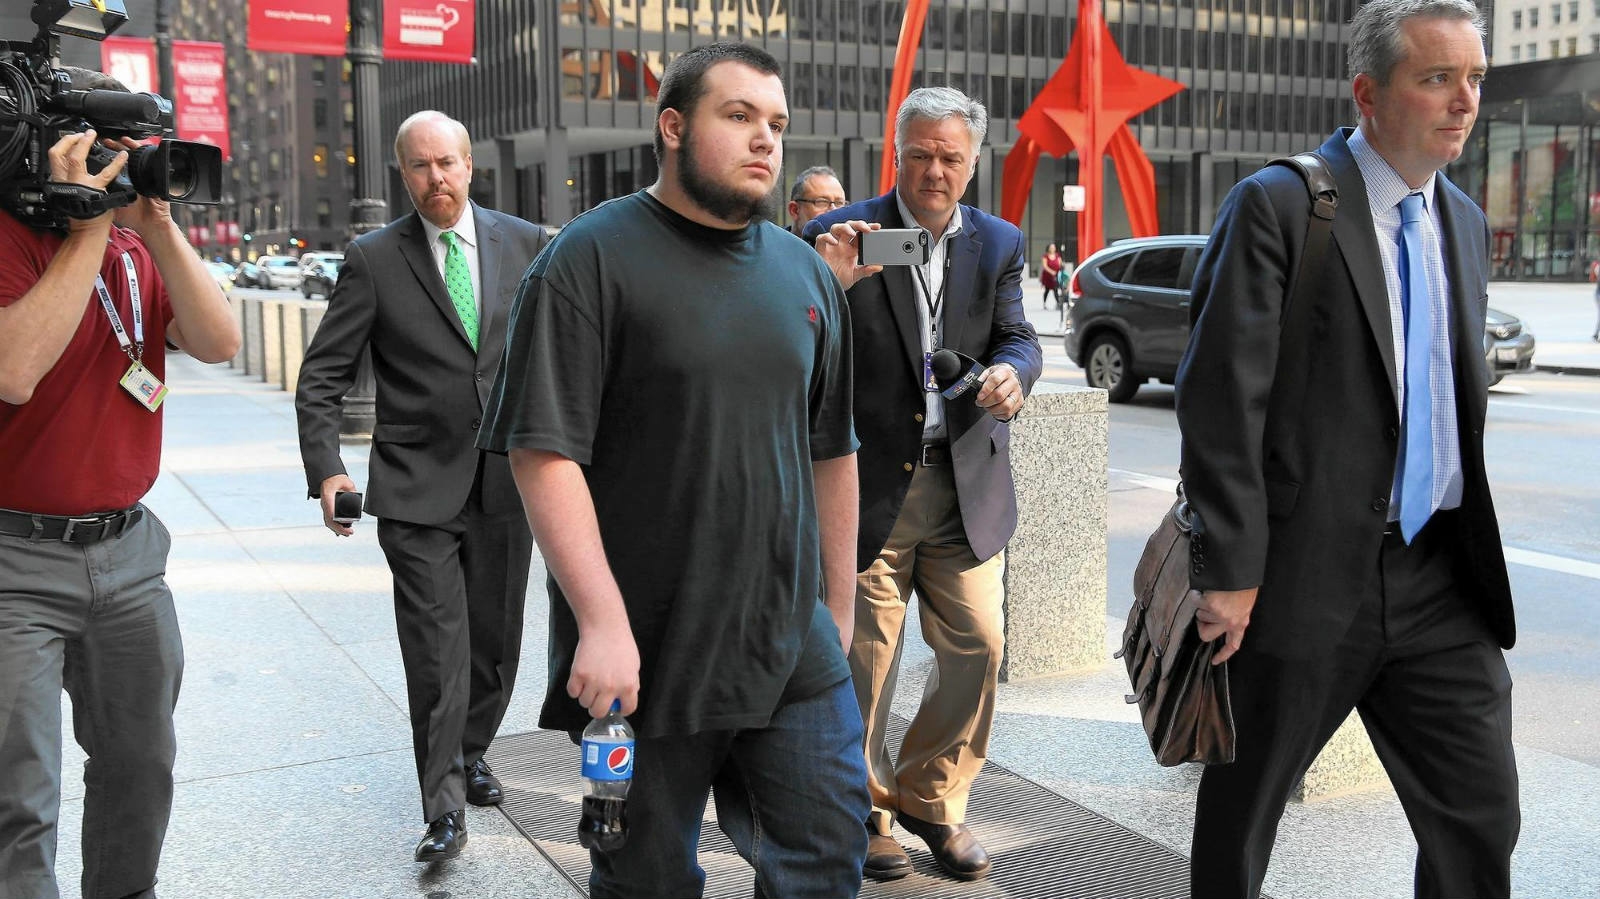 Lizard Squad's founding member pleads guilty to cyber-crimes | DeviceDaily.com